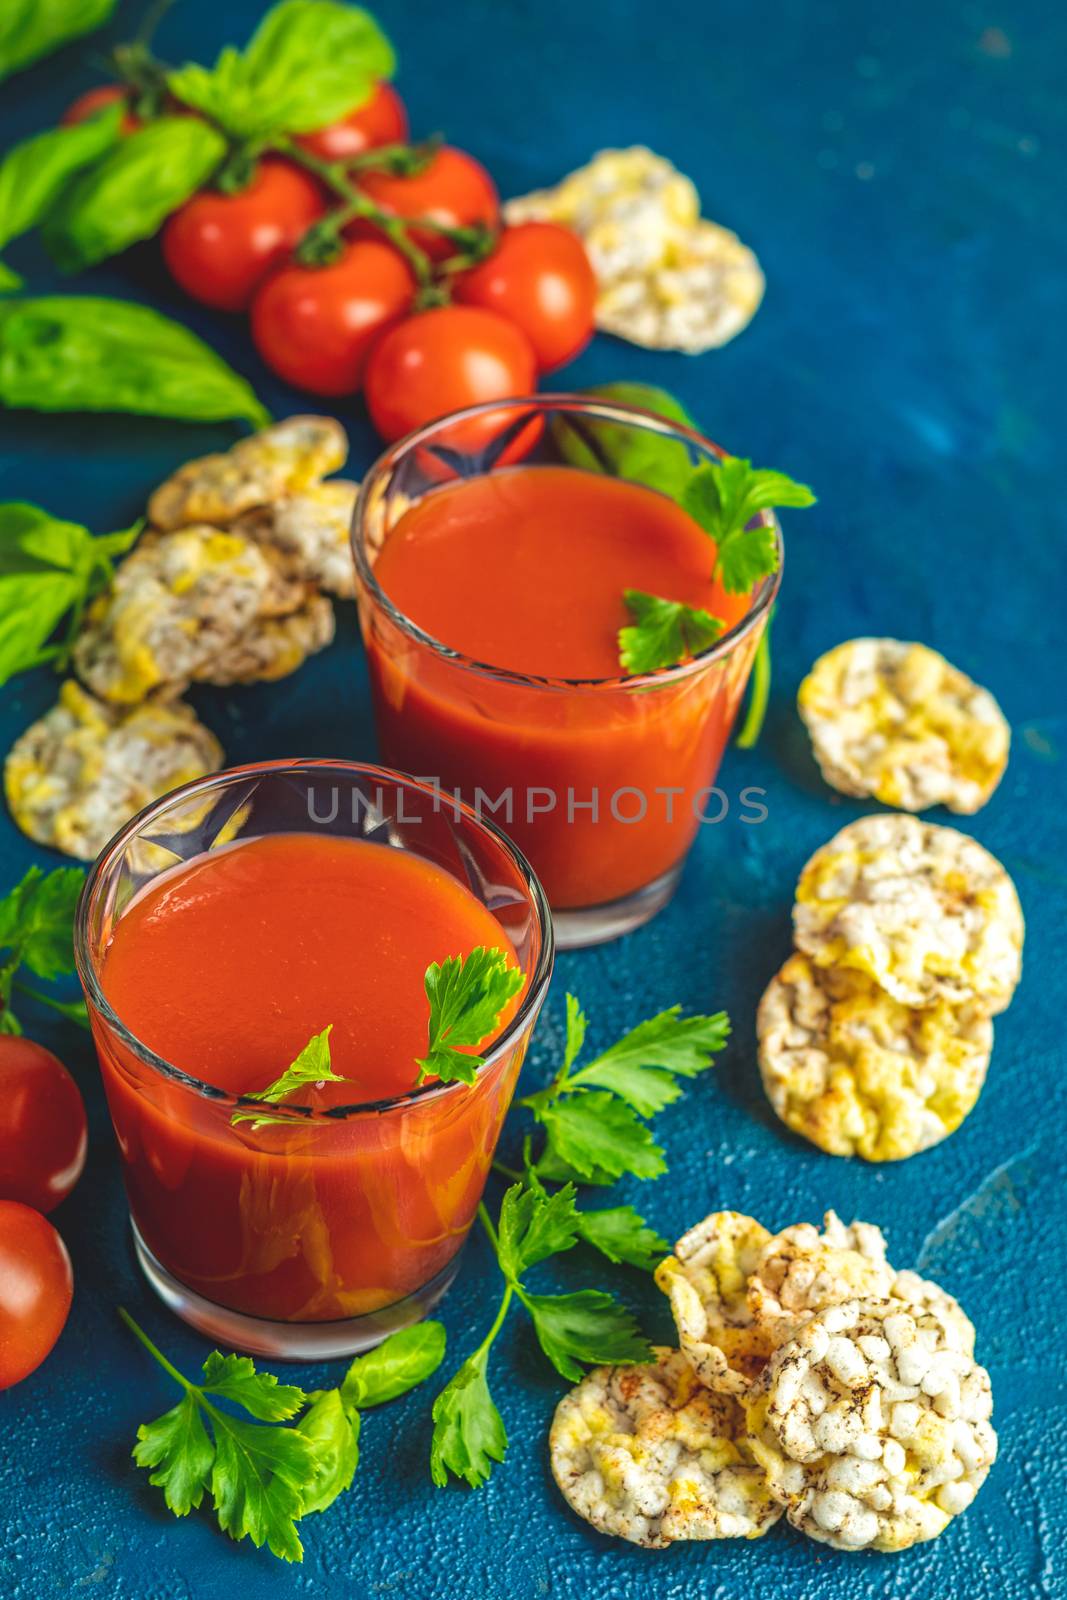 Red cocktail with tomato juice between tomatoes, basil, parsley and nutritious cereal breads. Delicious tomato bloody mary cocktail on dark blue concrete table.